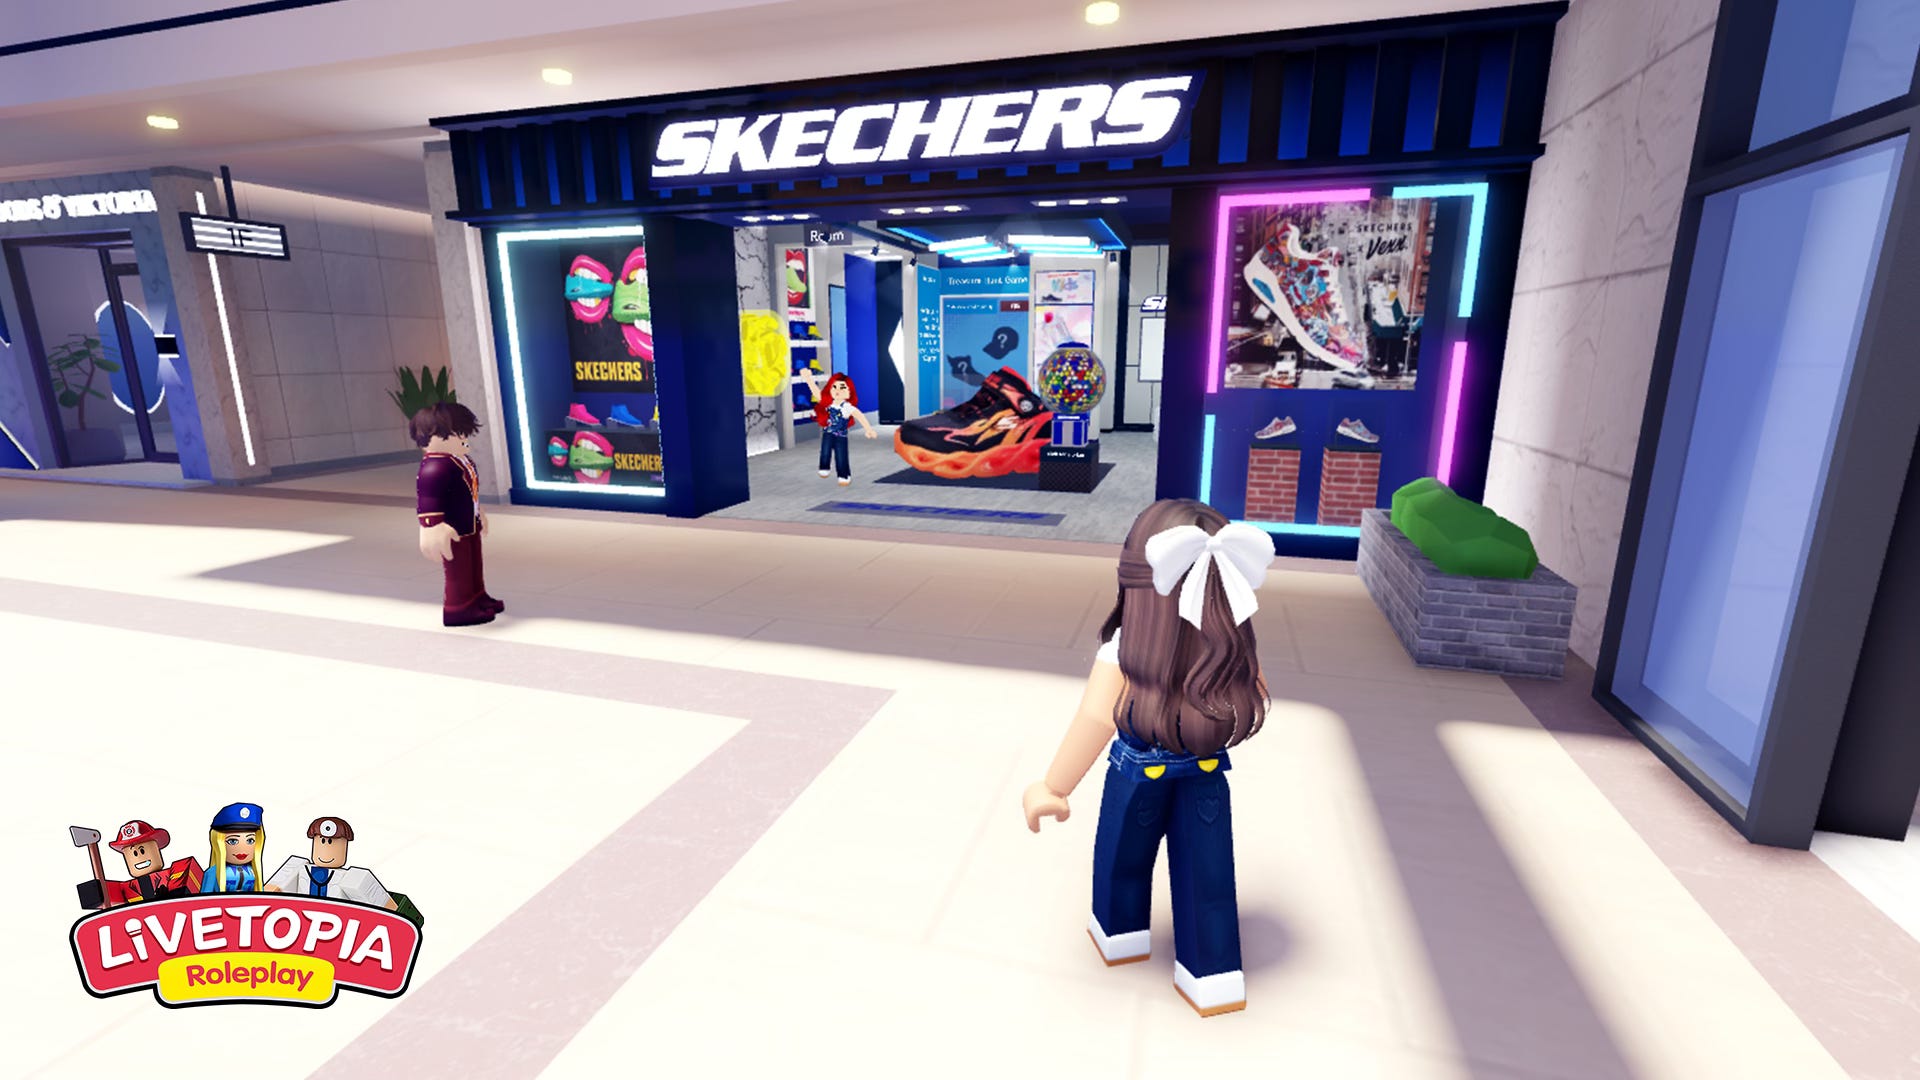 Skechers Uses Roblox to Promote Real-World Footwear